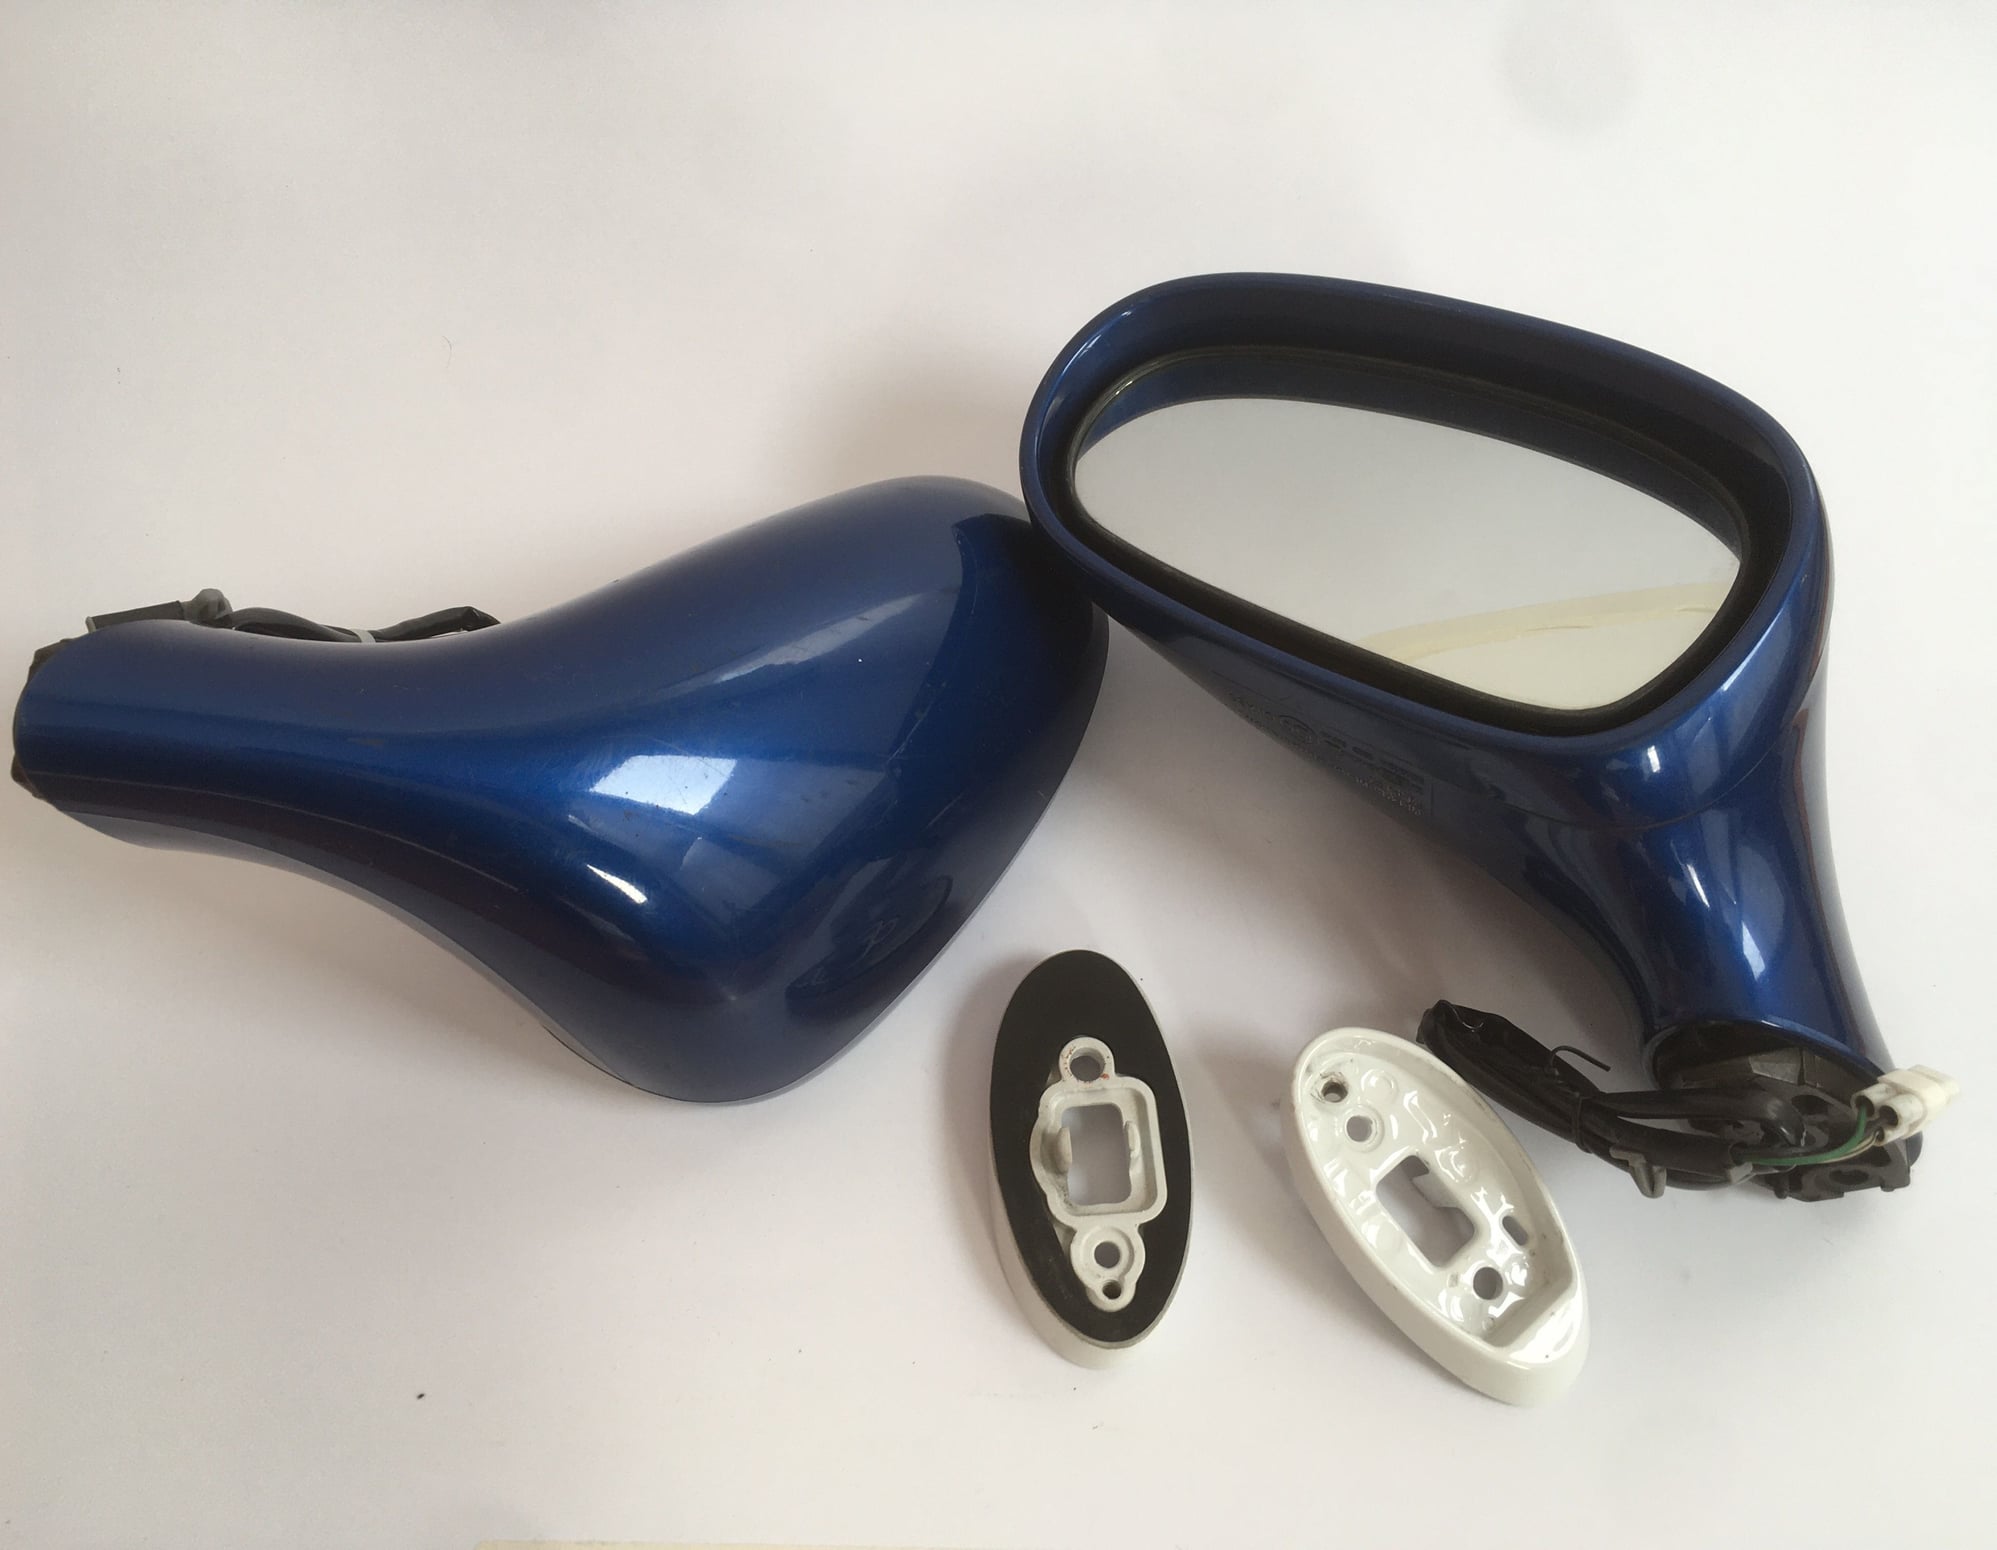 Exterior Body Parts - FD Side mirrors with the base plates - Used - 1993 to 2002 Mazda RX-7 - Split, Croatia